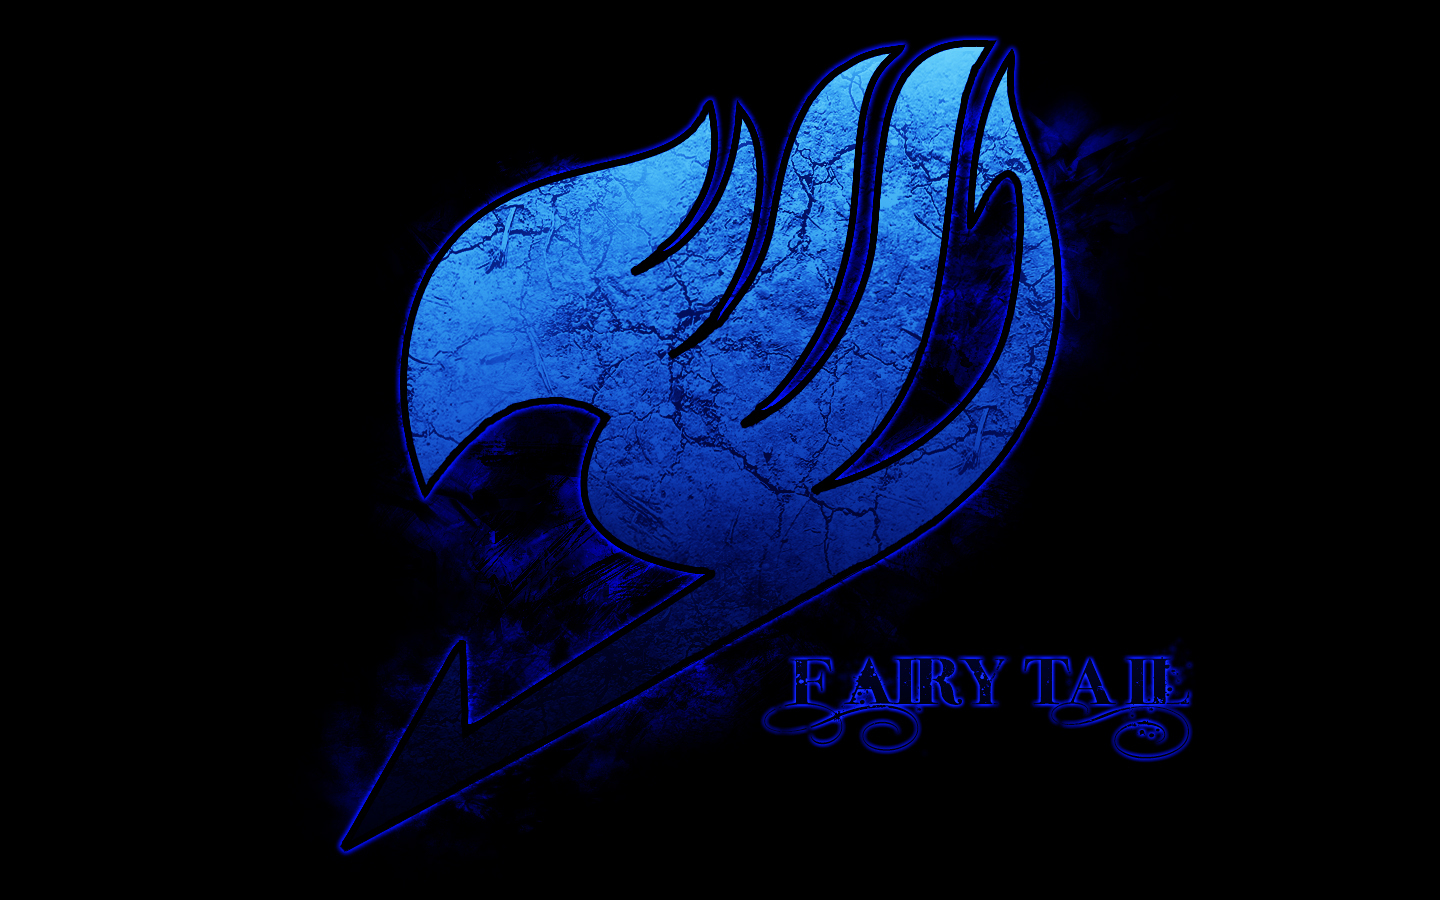 Fairy Tail images Blue FT Logo wallpaper photos 9950163